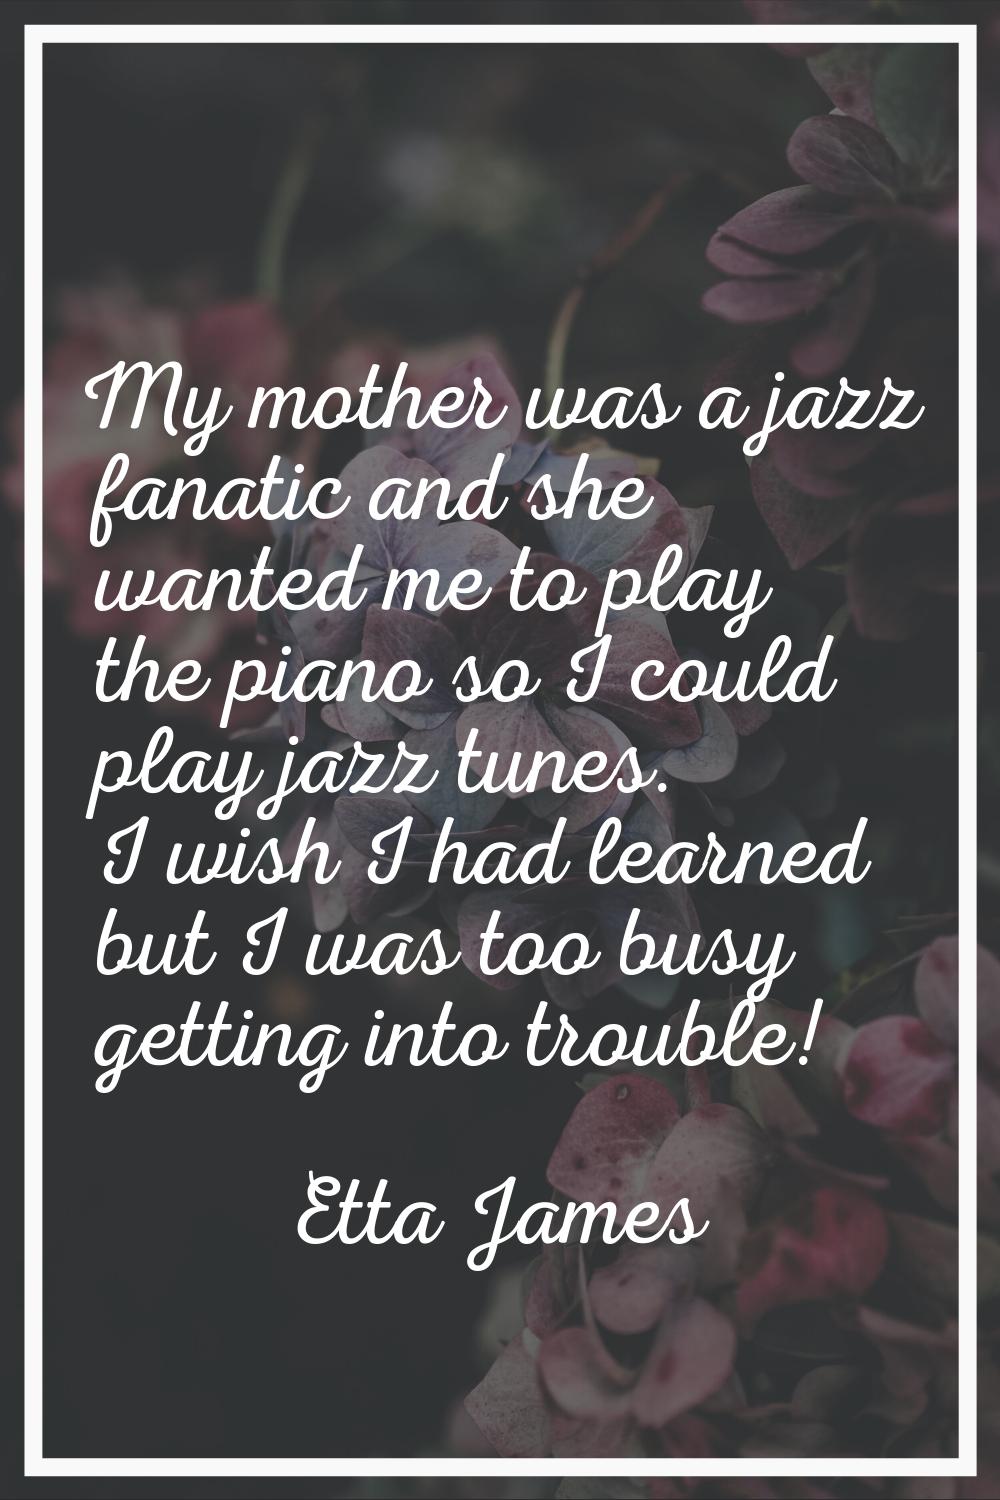 My mother was a jazz fanatic and she wanted me to play the piano so I could play jazz tunes. I wish